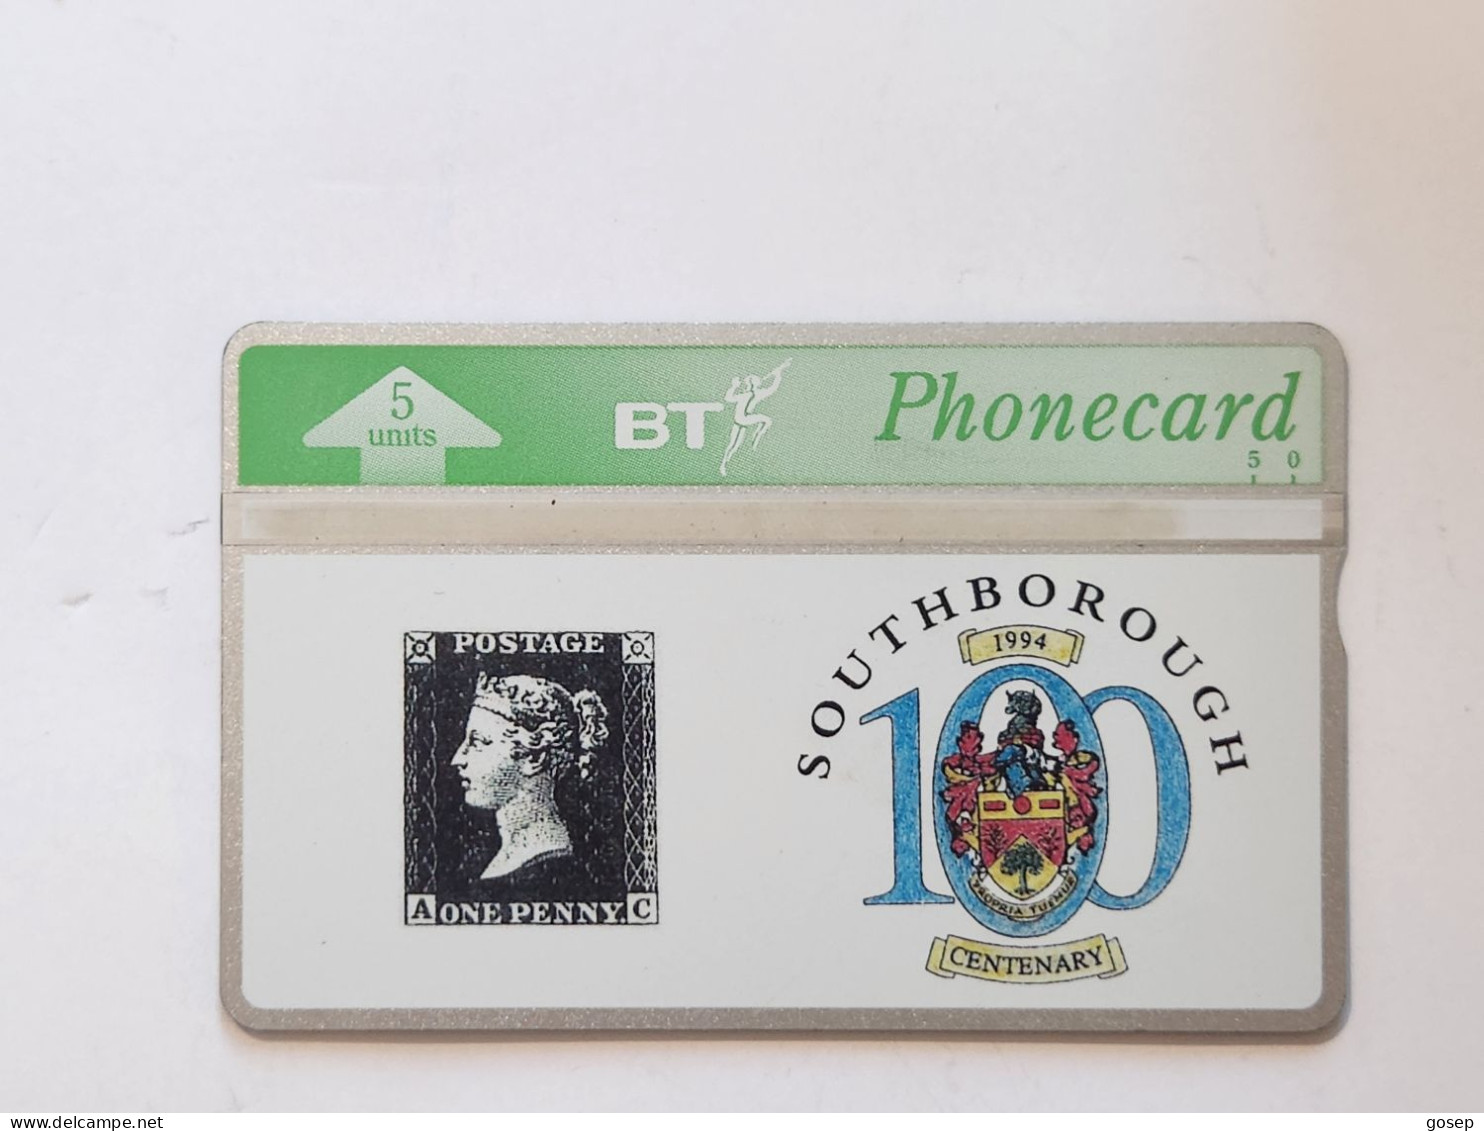 United Kingdom-(BTG-338)-Southborough Centenary-(312)(5units)(407A36978)(tirage-1.000)-price Cataloge-20.00£-mint - BT General Issues